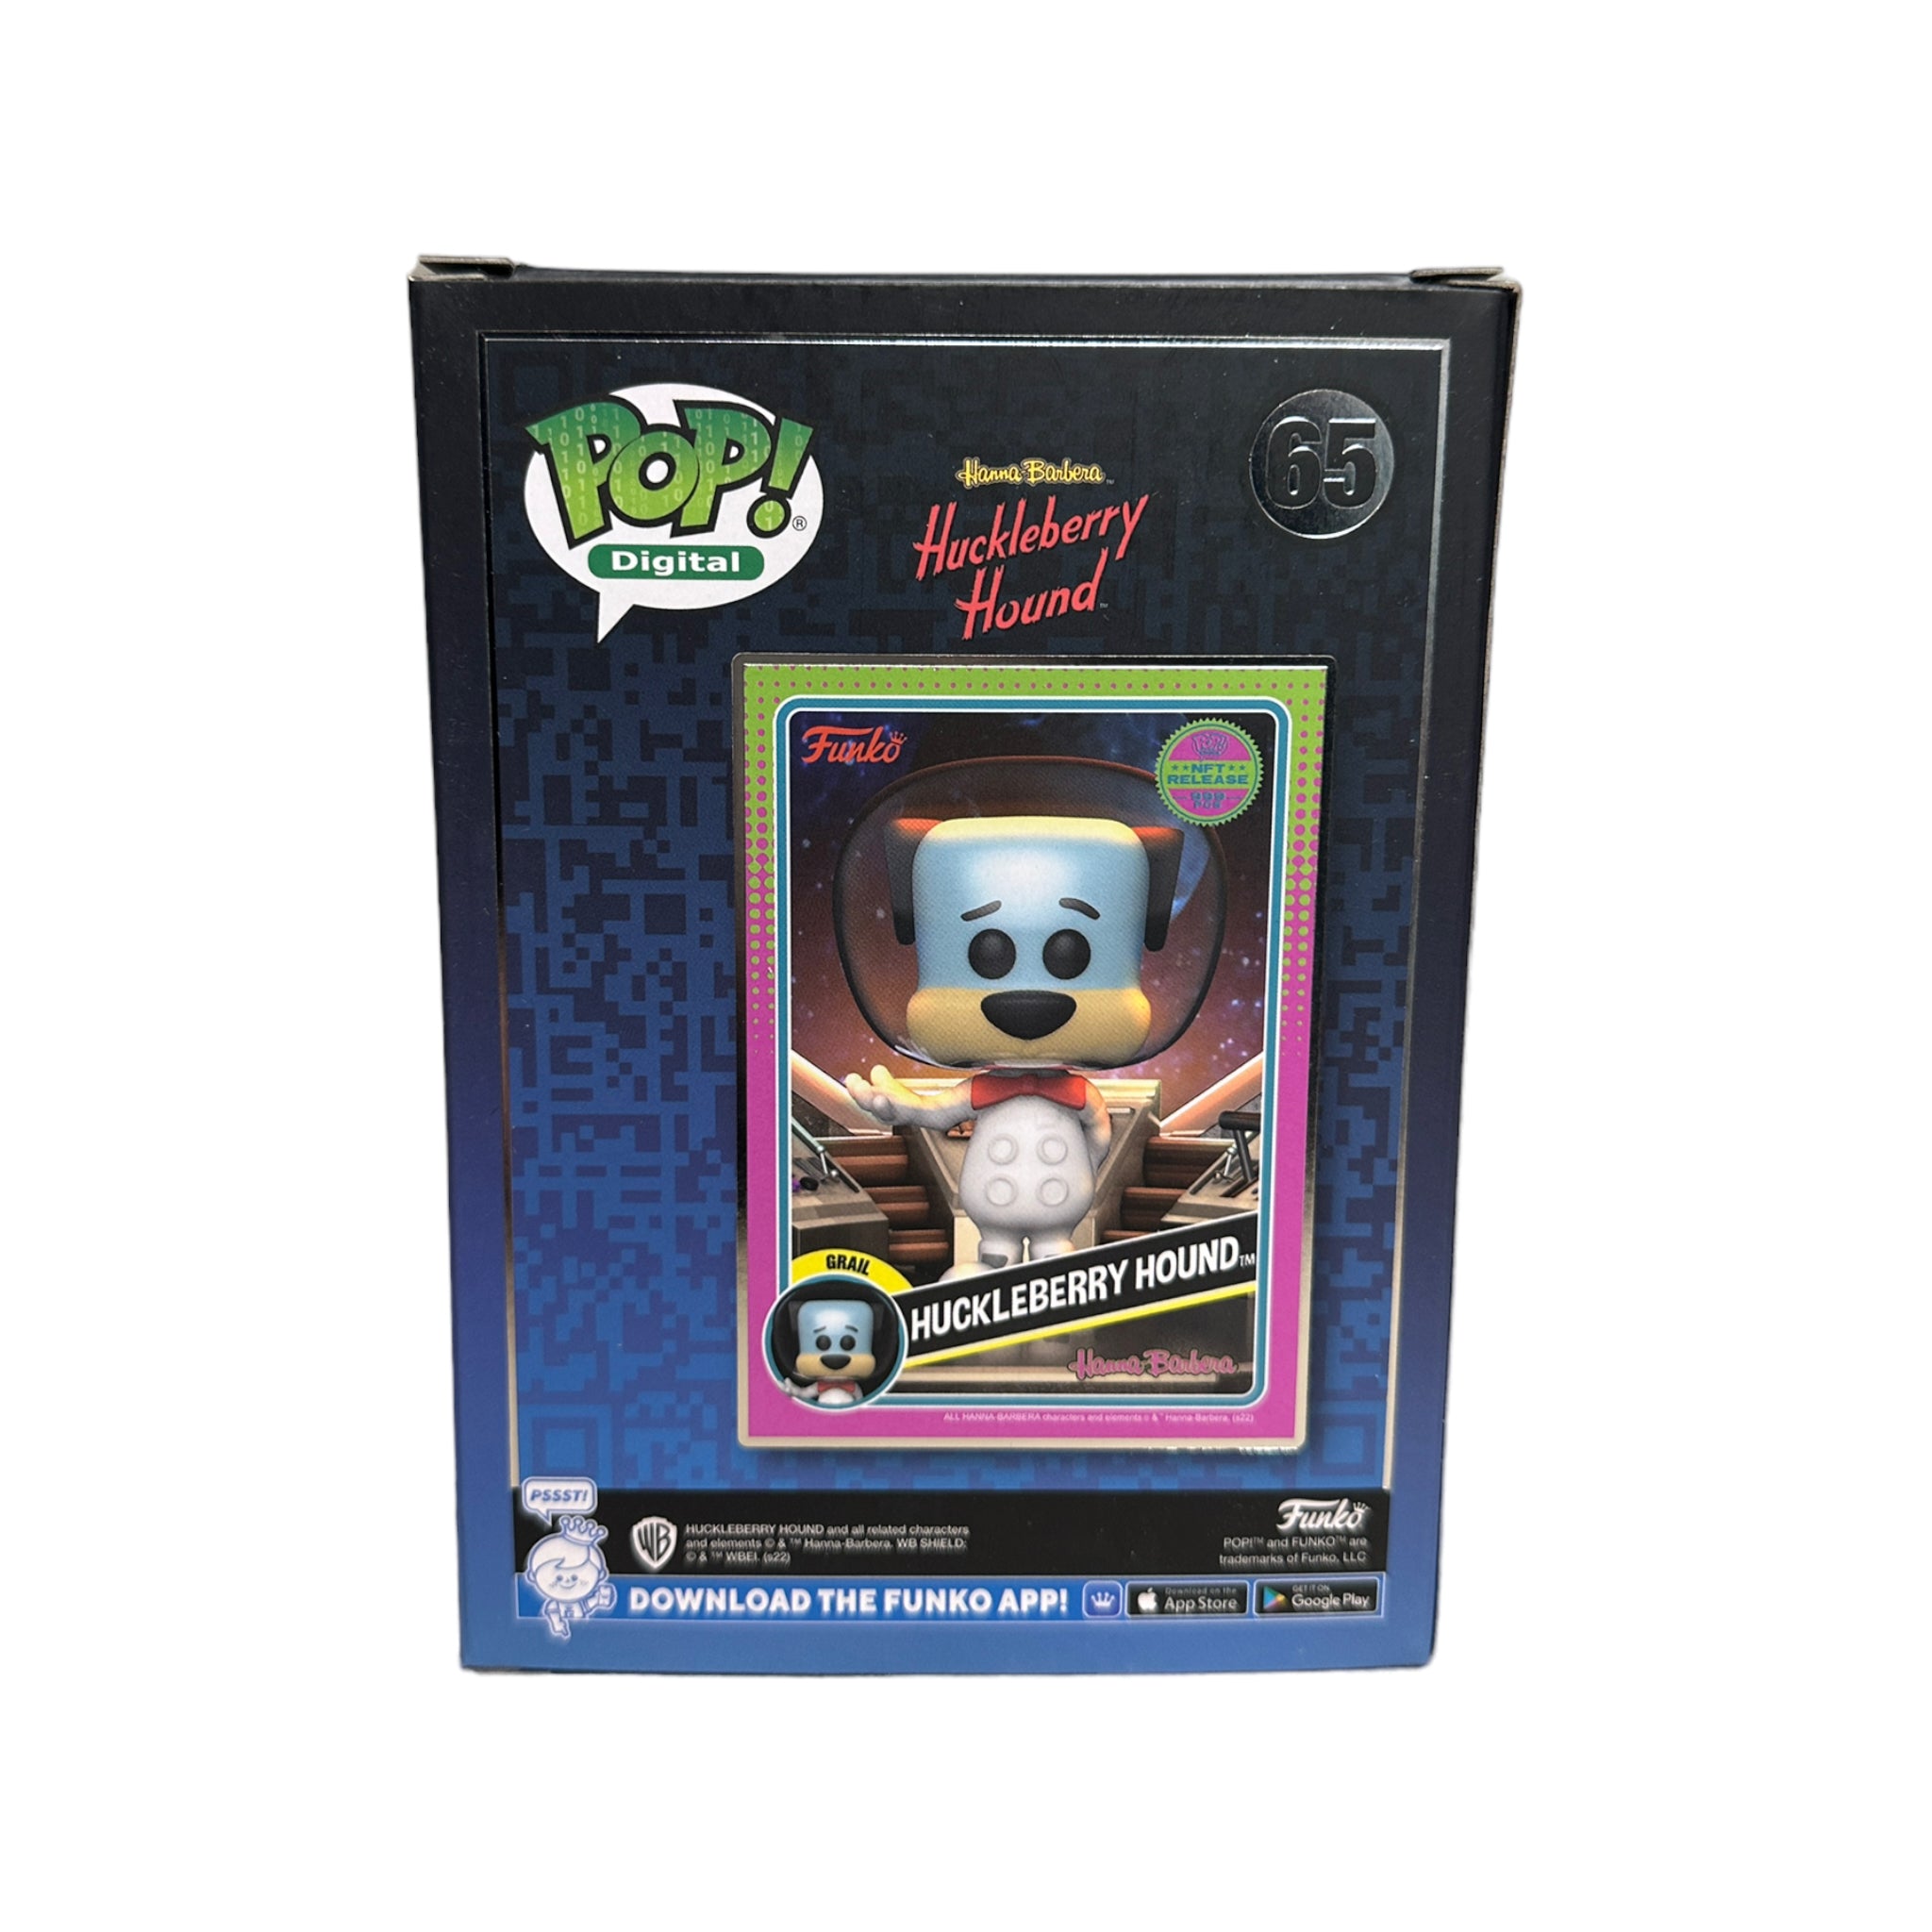 Huckleberry Hound #65 Funko Pop! - Huckleberry Hound - NFT Release Exclusive LE999 Pcs - Condition 9/10